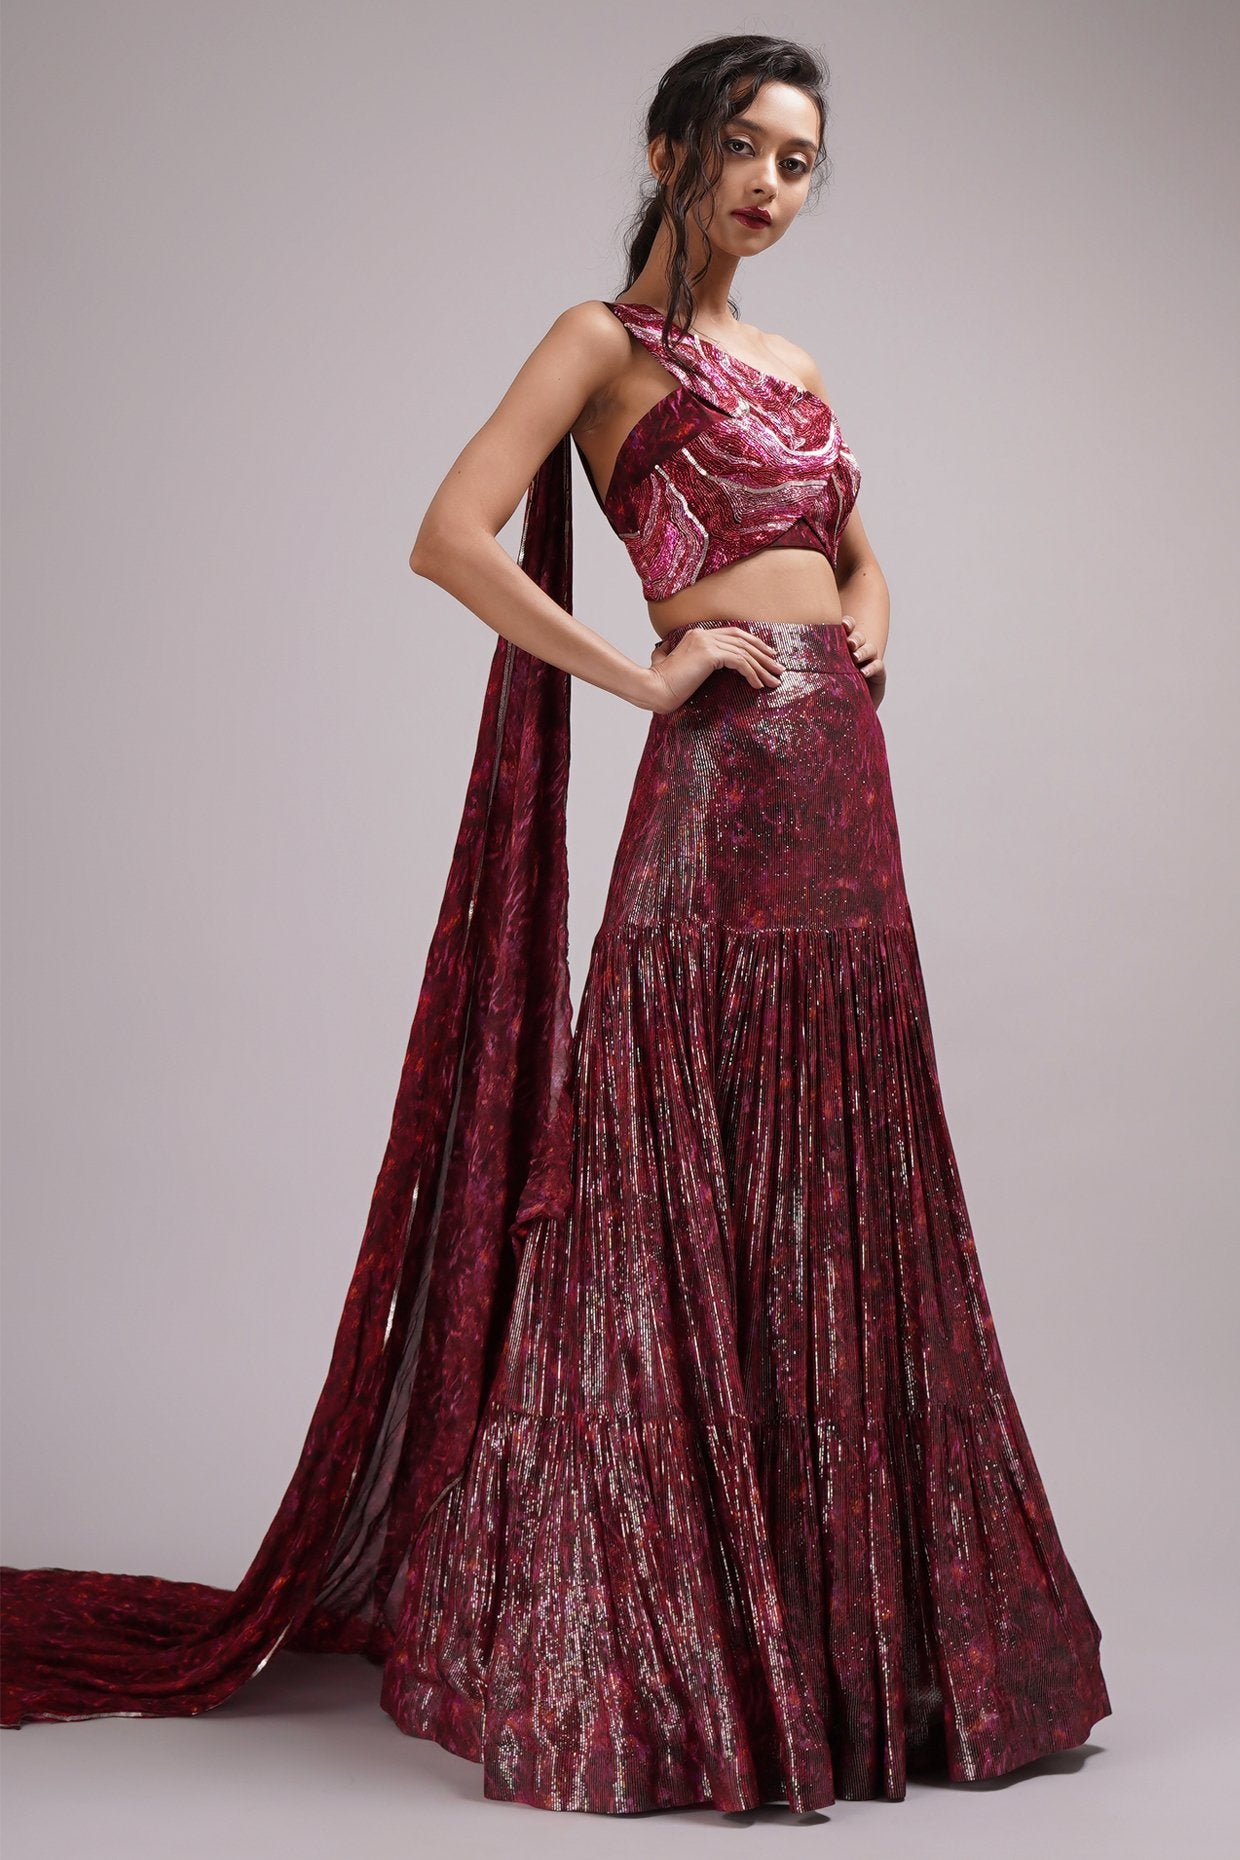 One Shoulder Cape Style Blouse And Embroidered Lehenga – Saris and Things